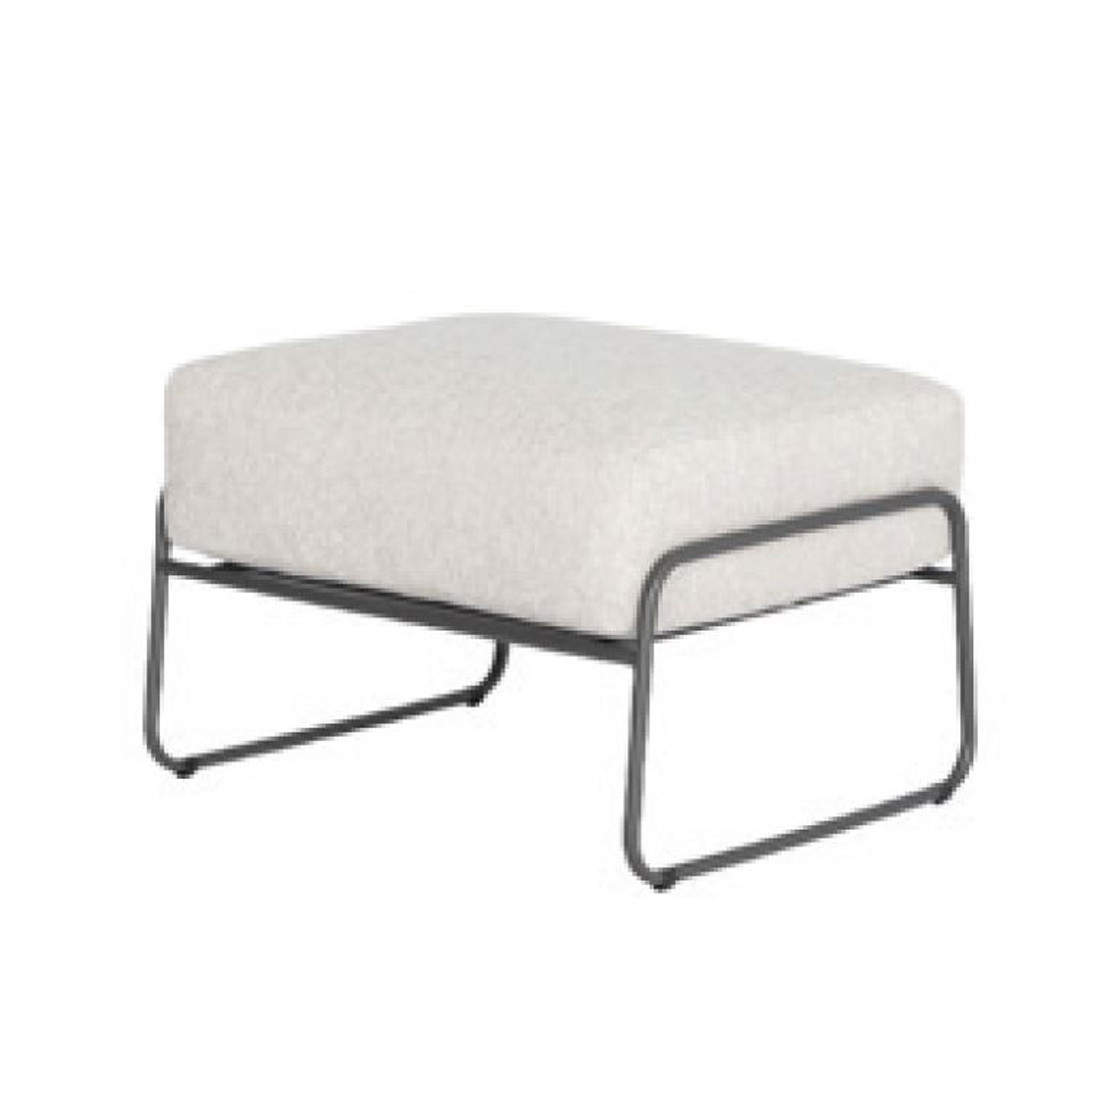 Balade footstool anthracite with cushion